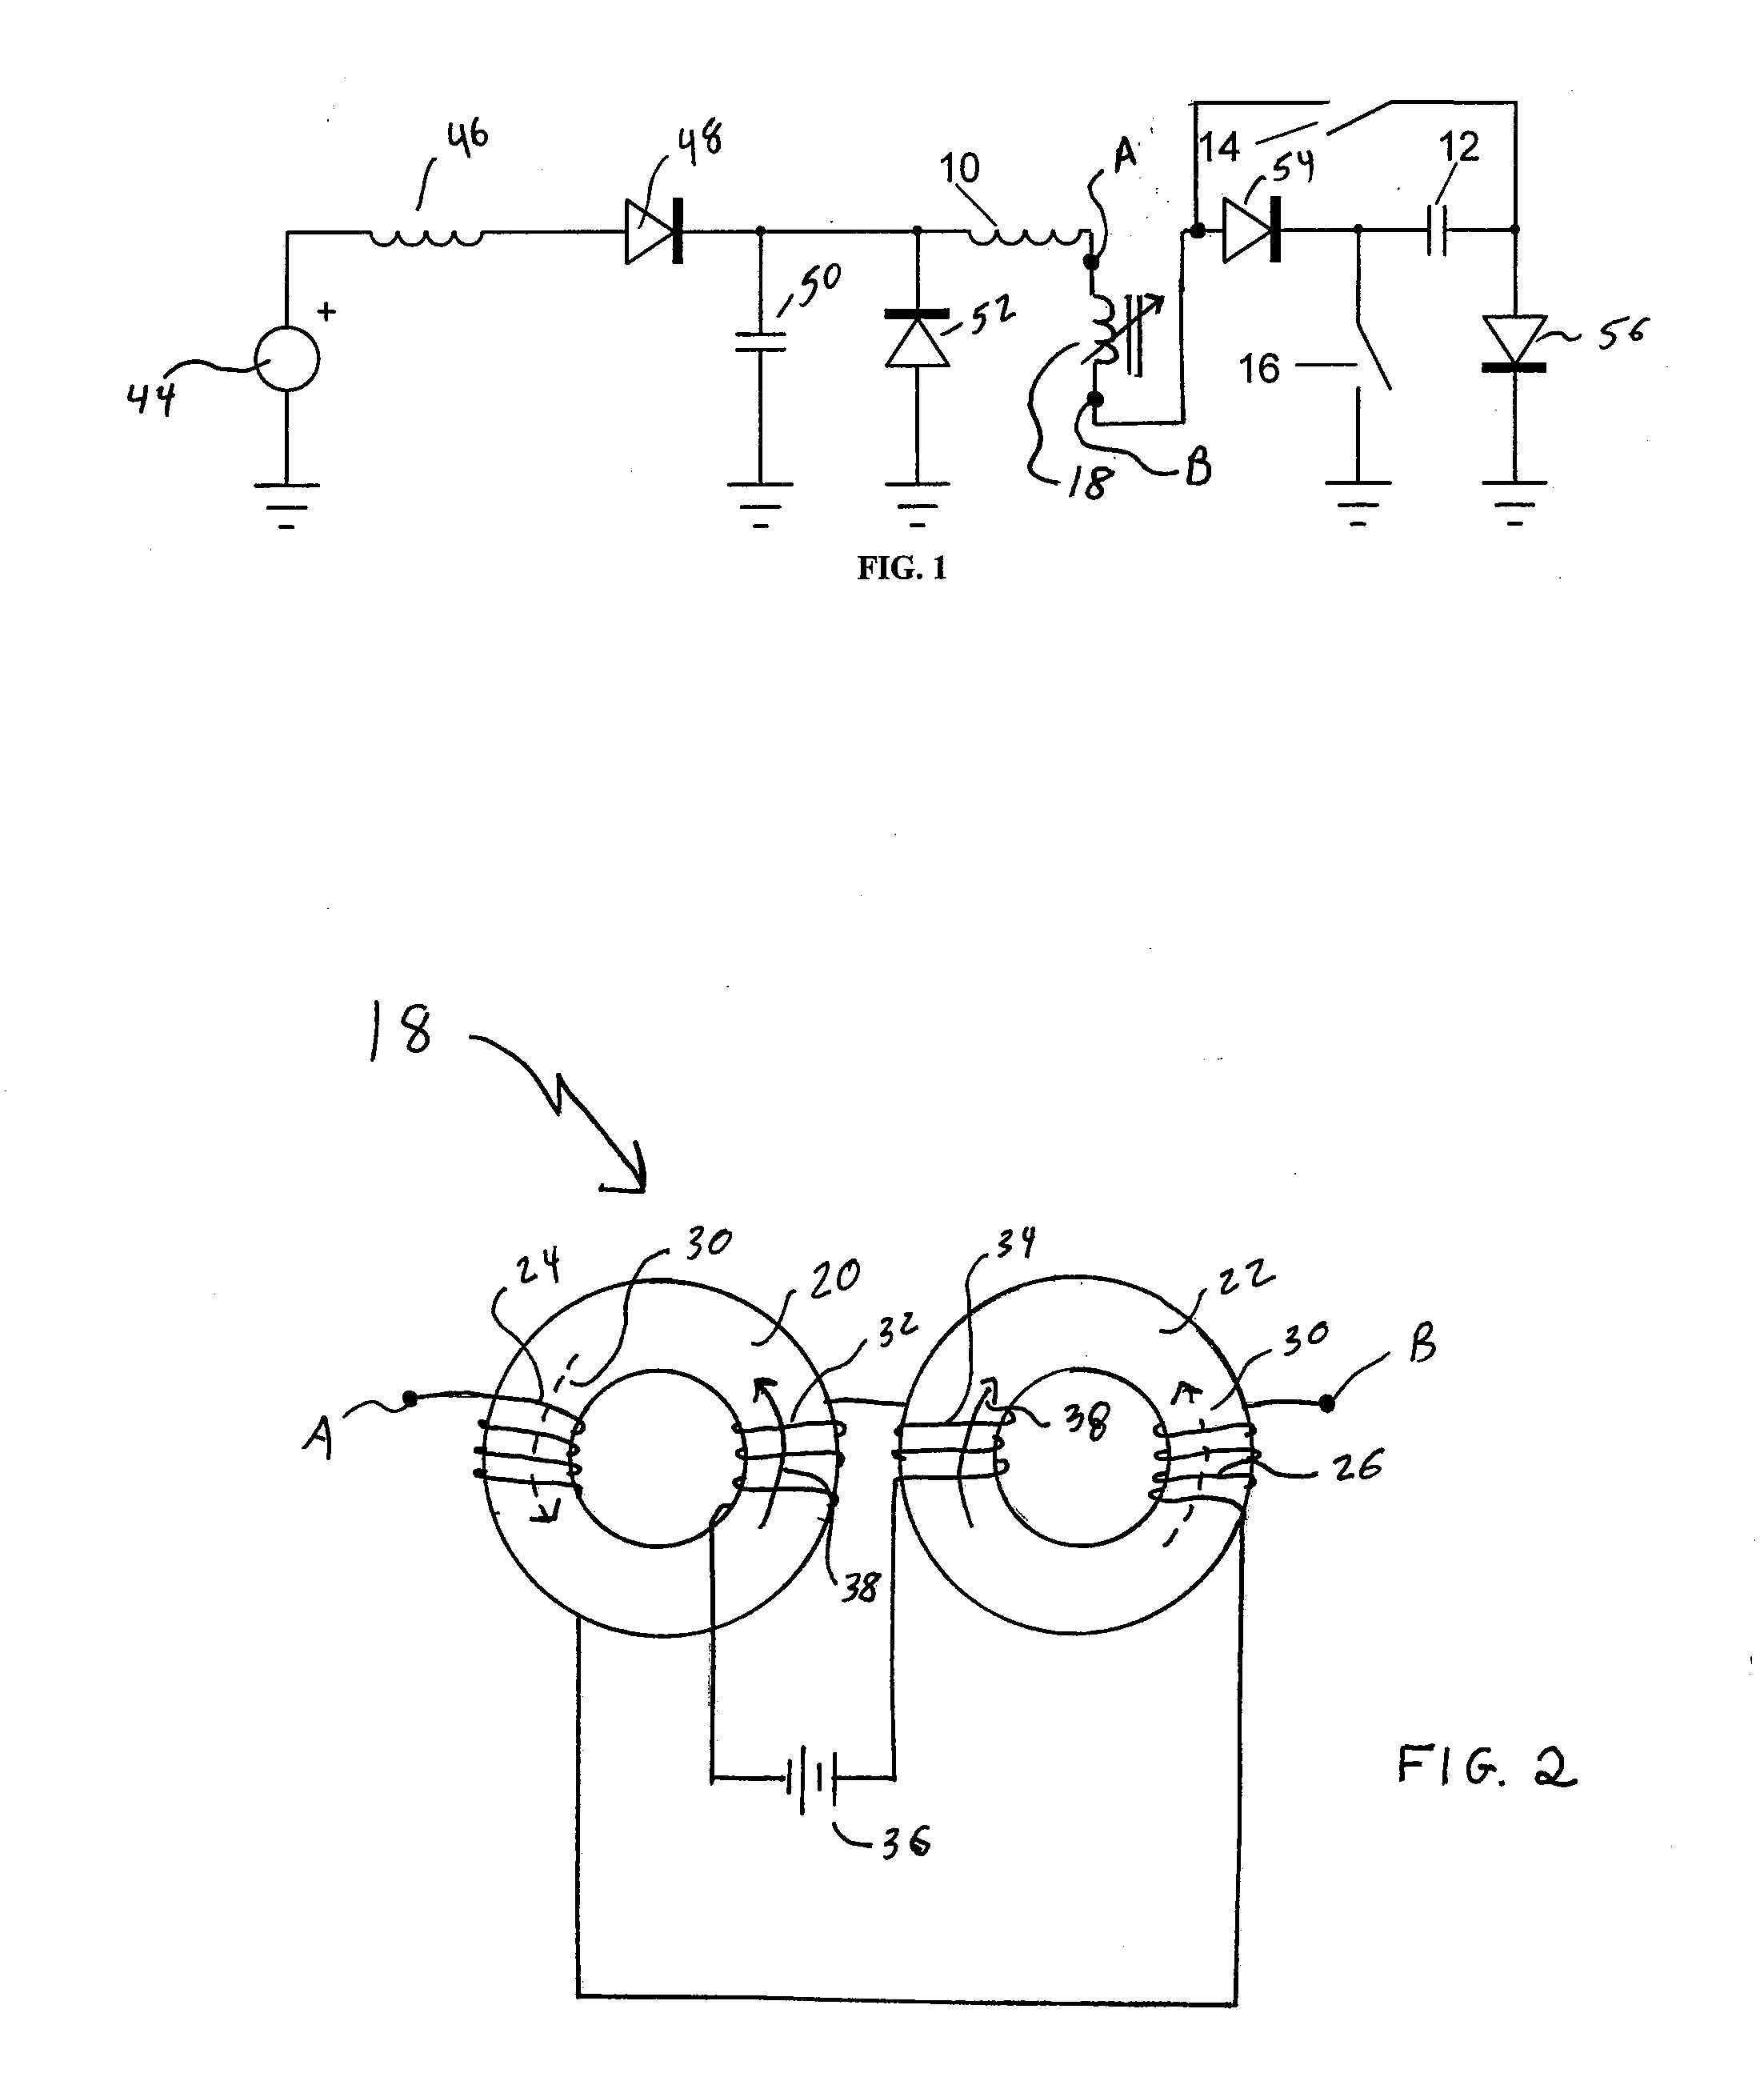 Variable inductor as downhole tuner